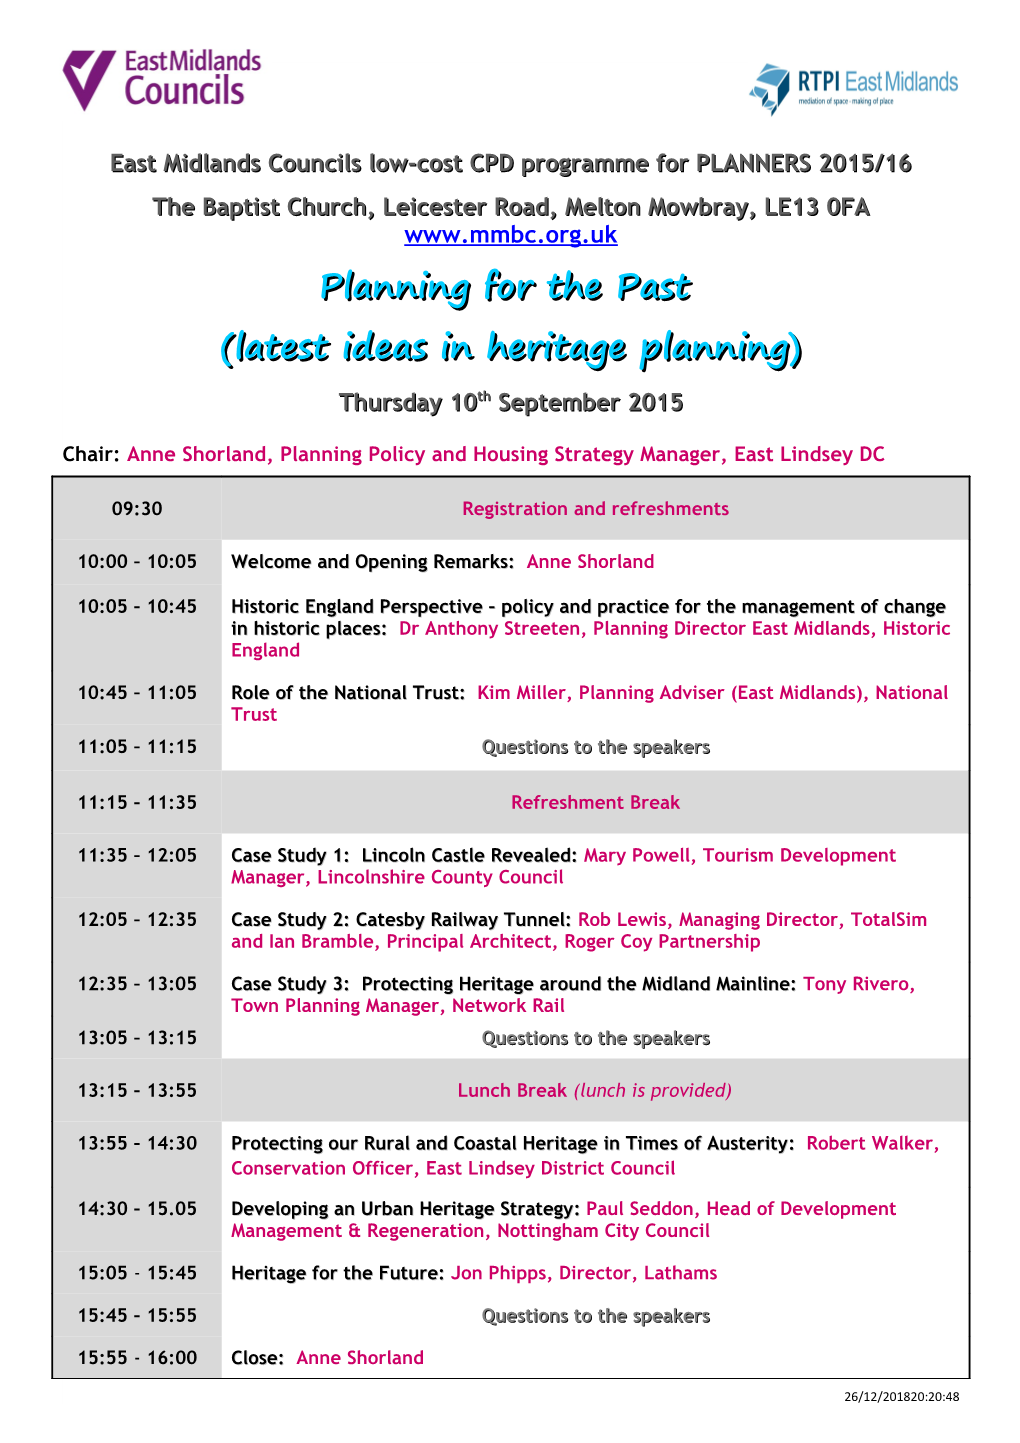 East Midlands Councils Low-Cost CPD Programme for PLANNERS 2015/16